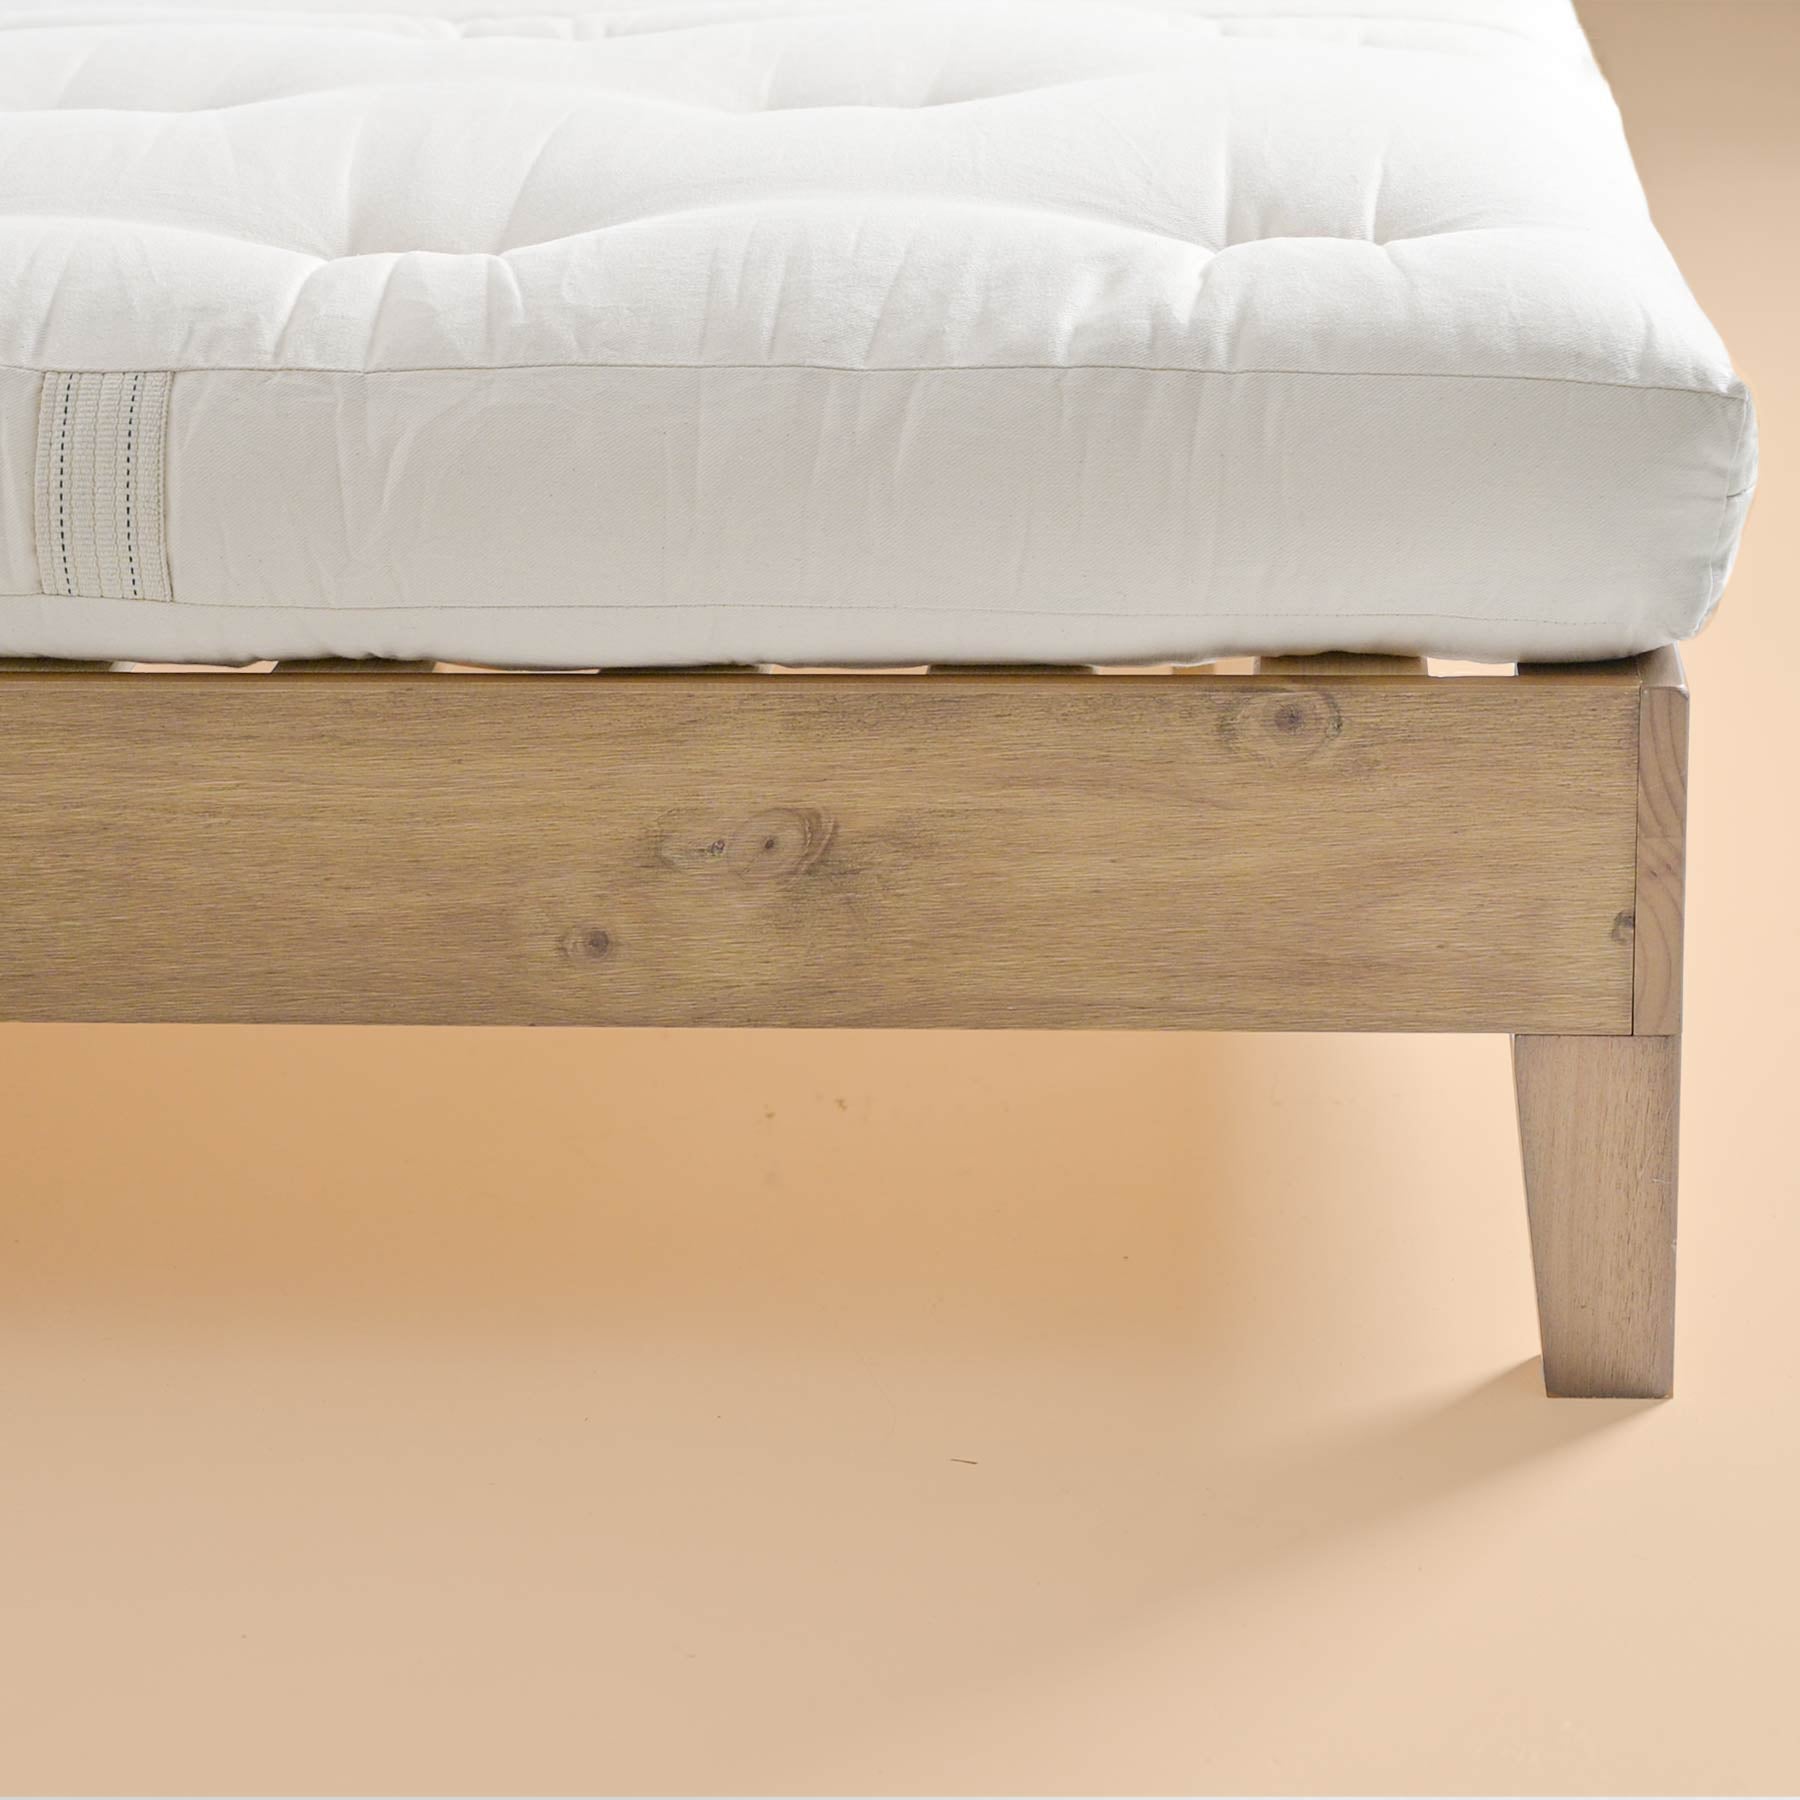 Futon natural mattress - quality made in Germany